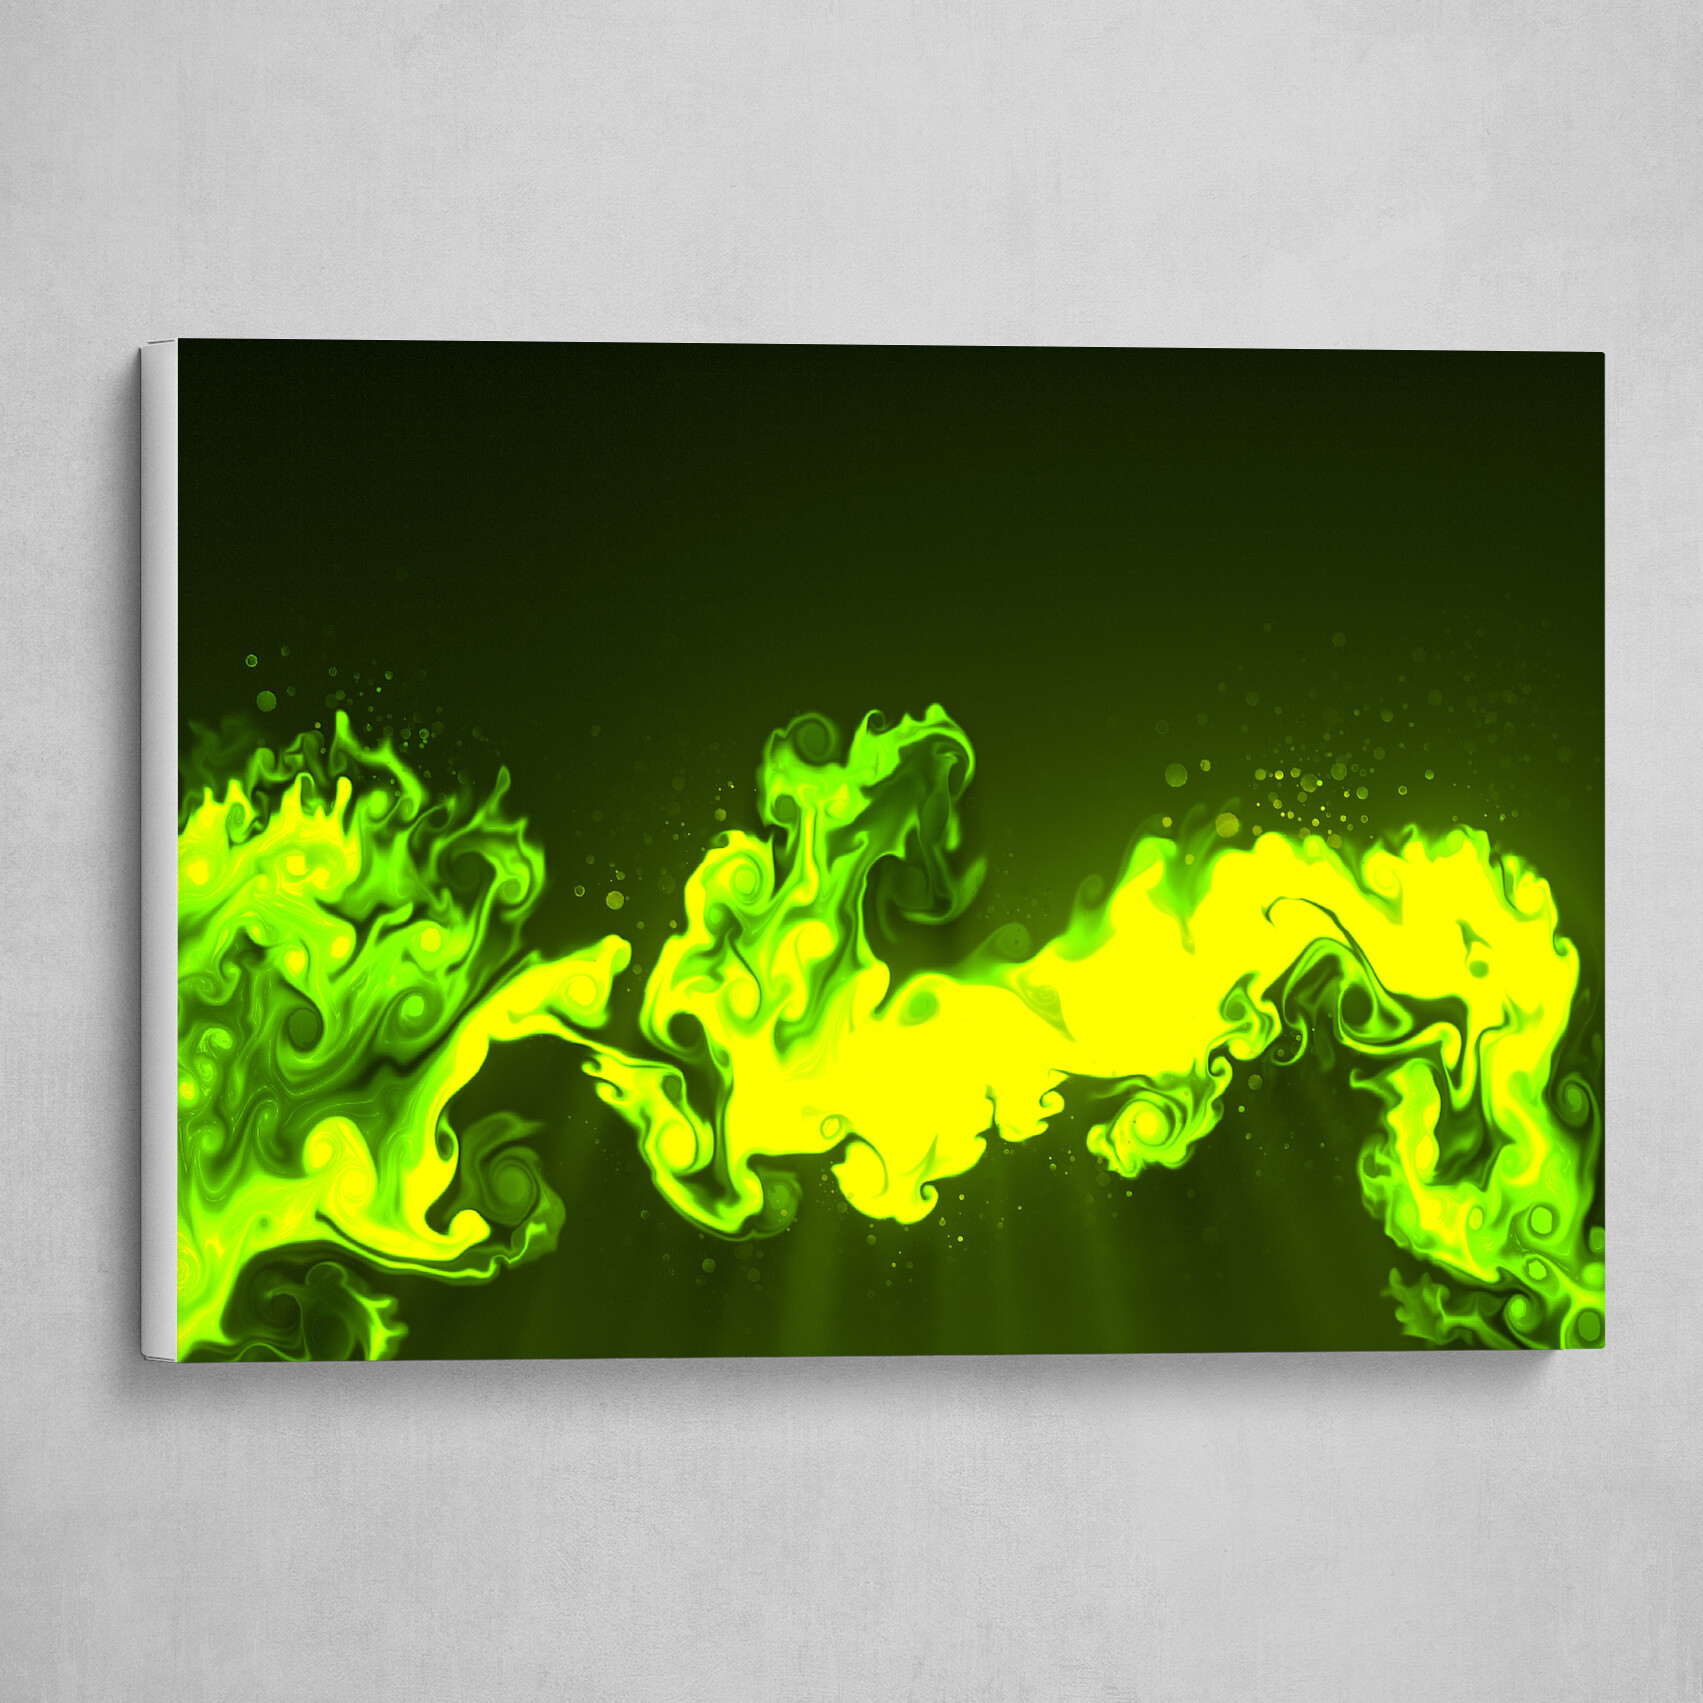 Green and Black fluid pour abstract art 2